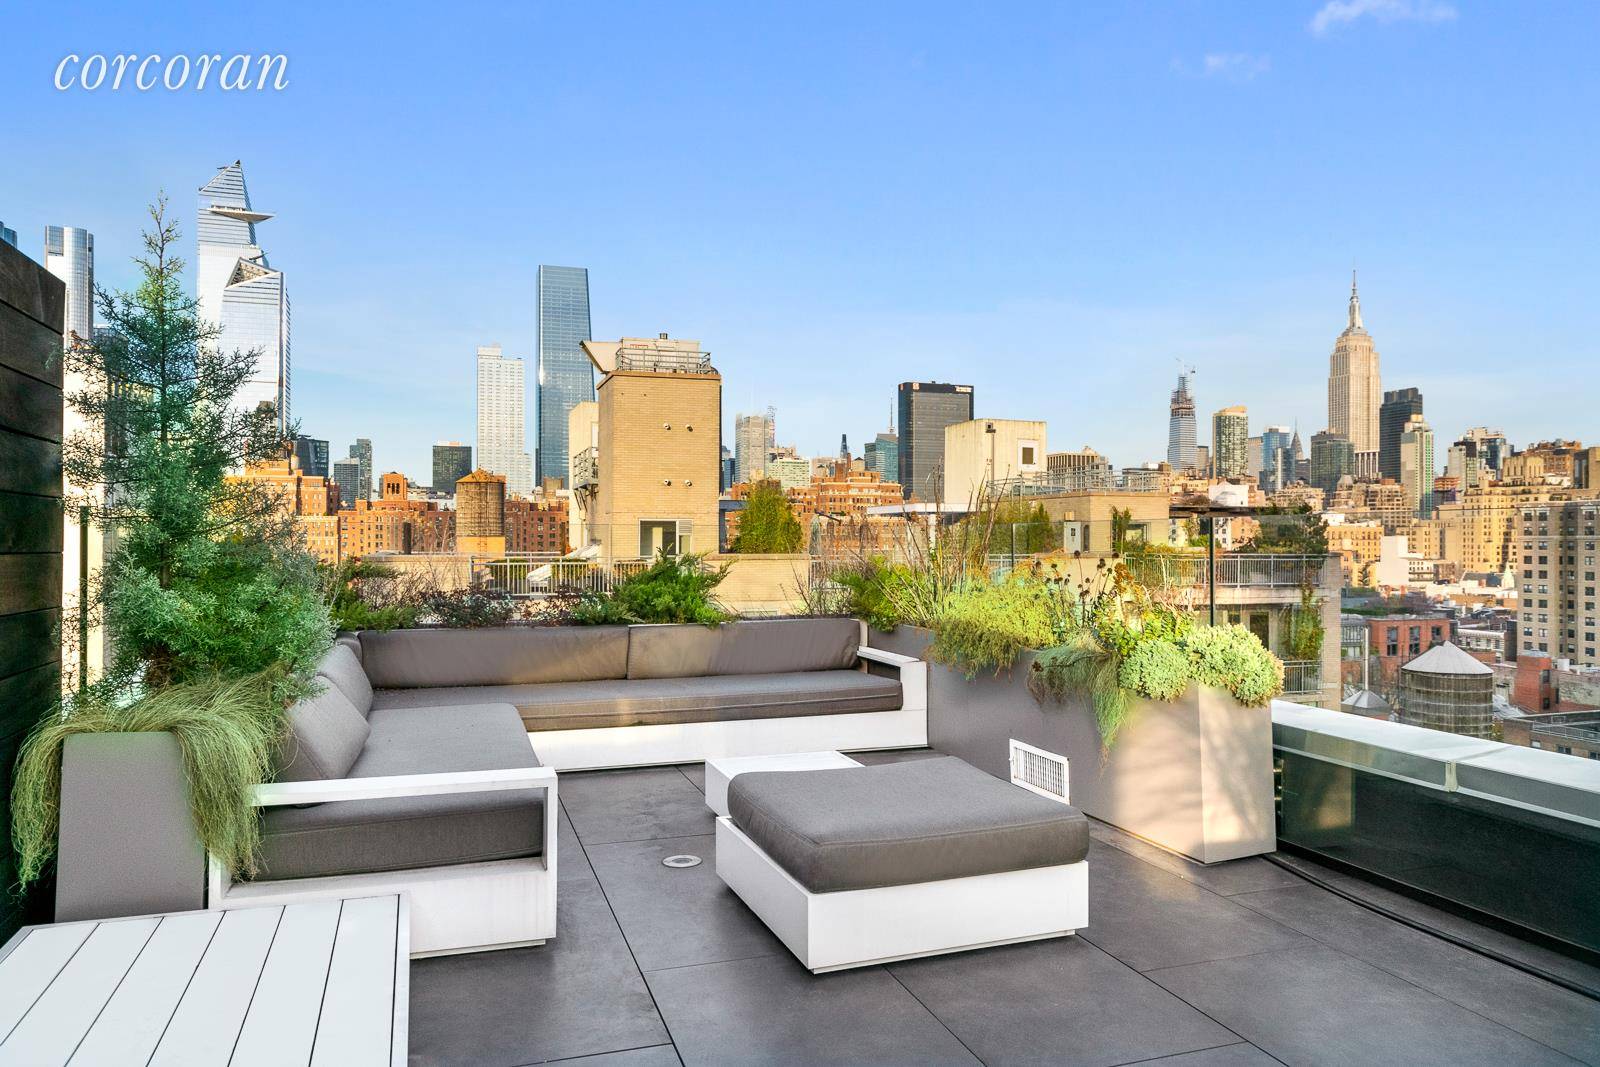 In the heart of prime West Chelsea is a highly coveted 883sqft large roof terrace with 360 degree Empire State views is complete with a gas BBQ grill, outdoor Gagganau ...